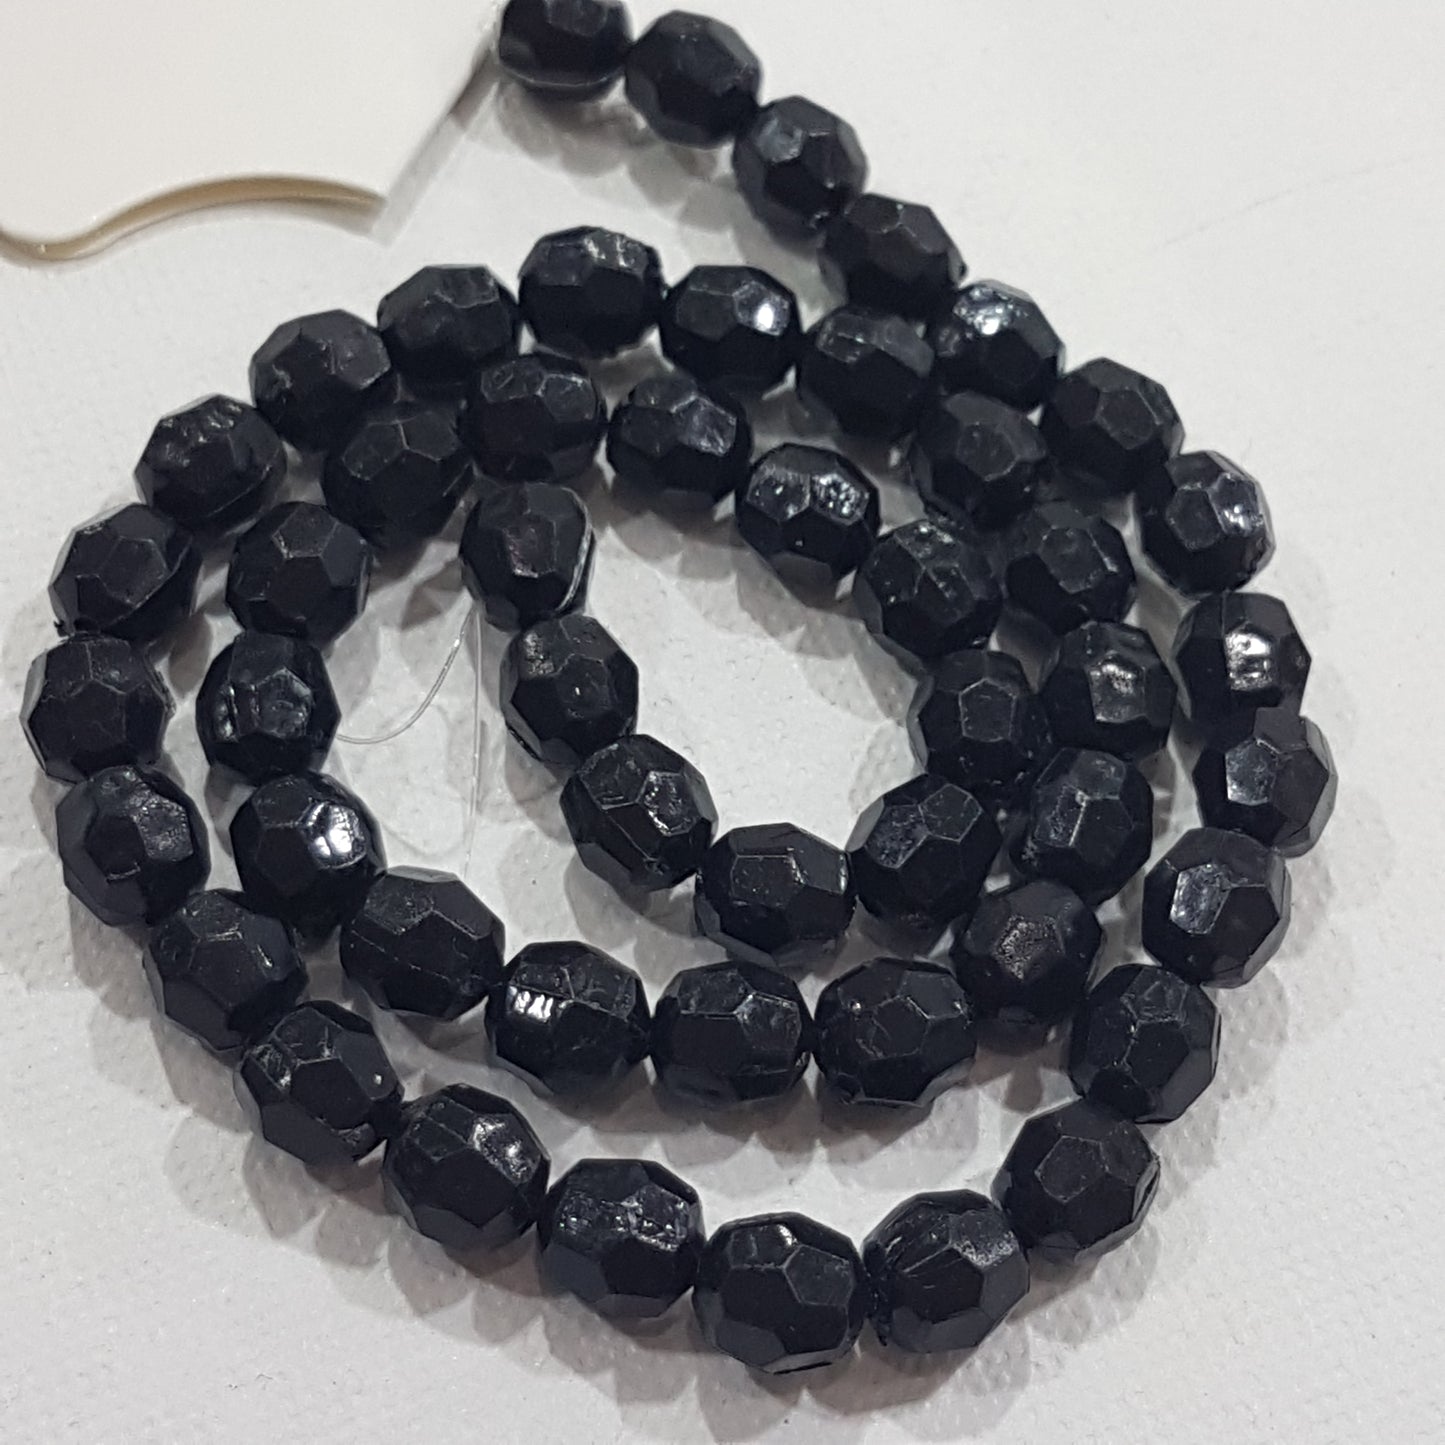 50pc Black Faceted Acrylic Beads